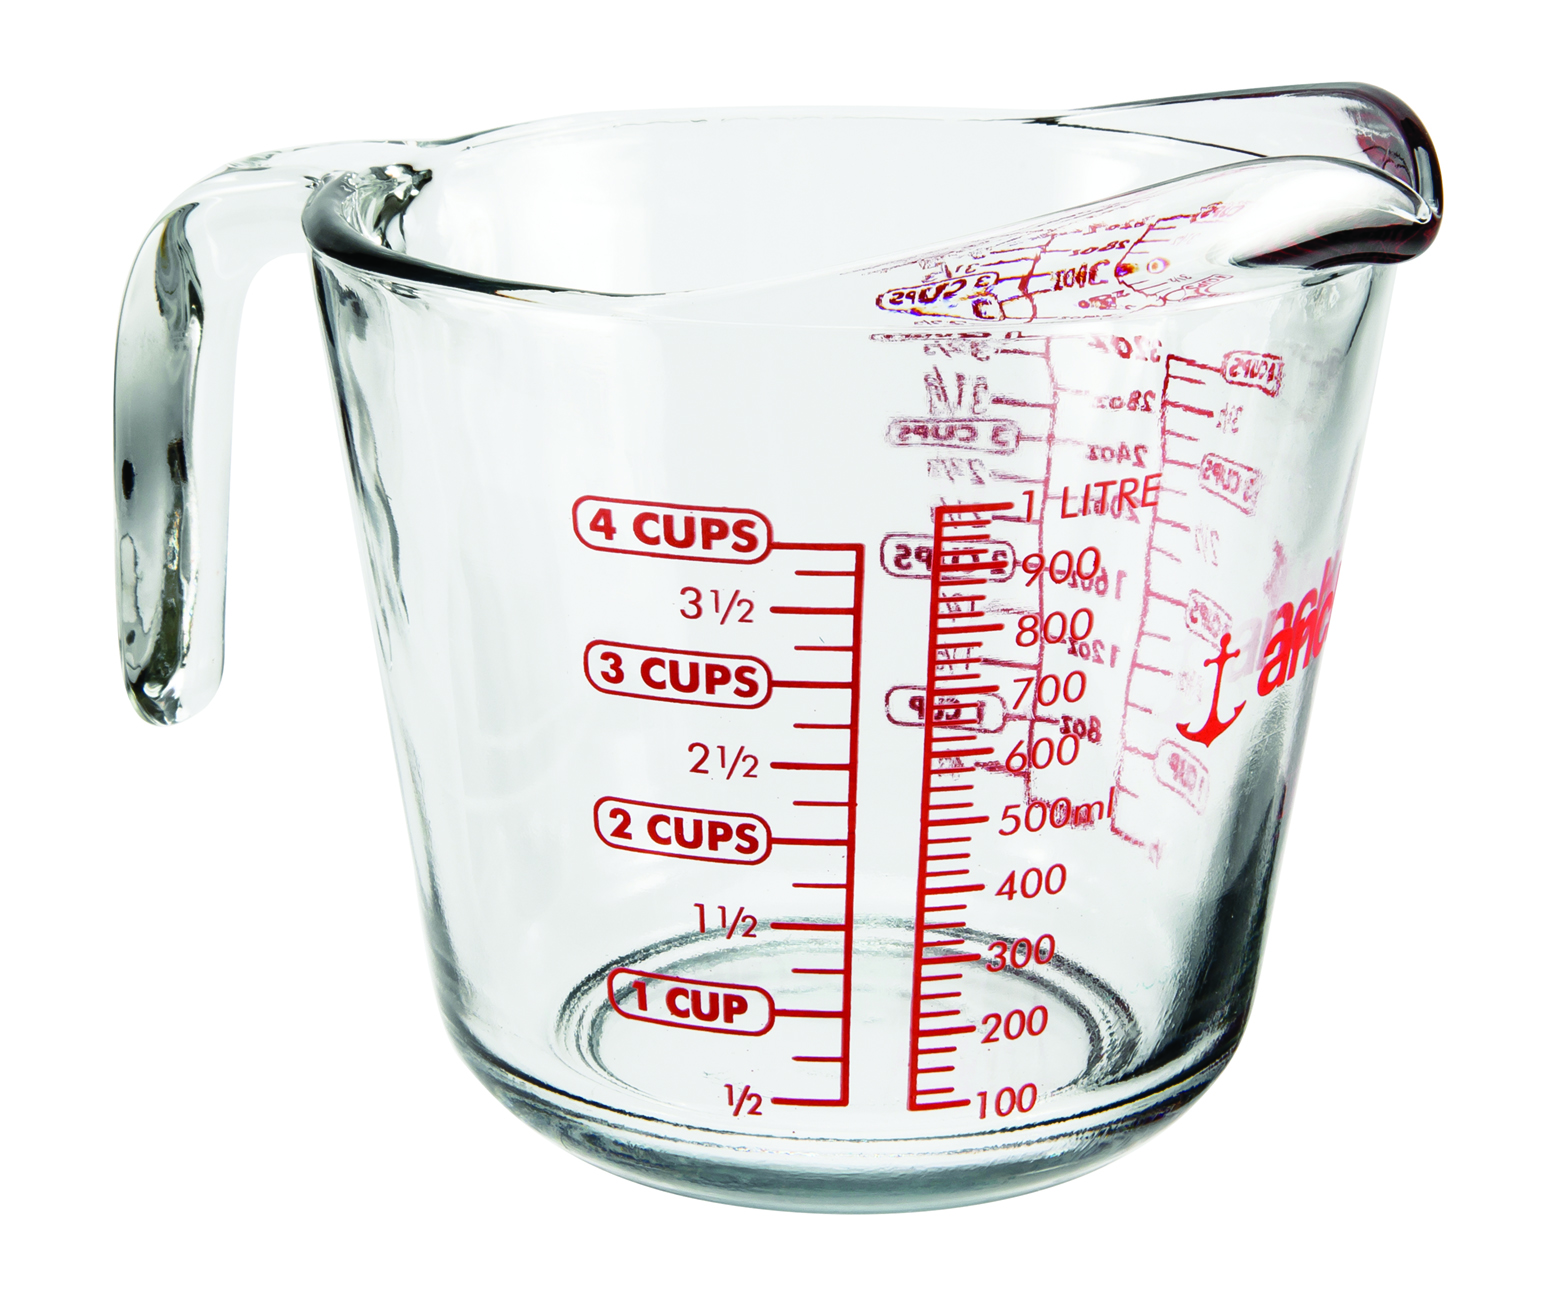 Anchor Hocking Glass Measuring Cup, 32 Oz, Clear